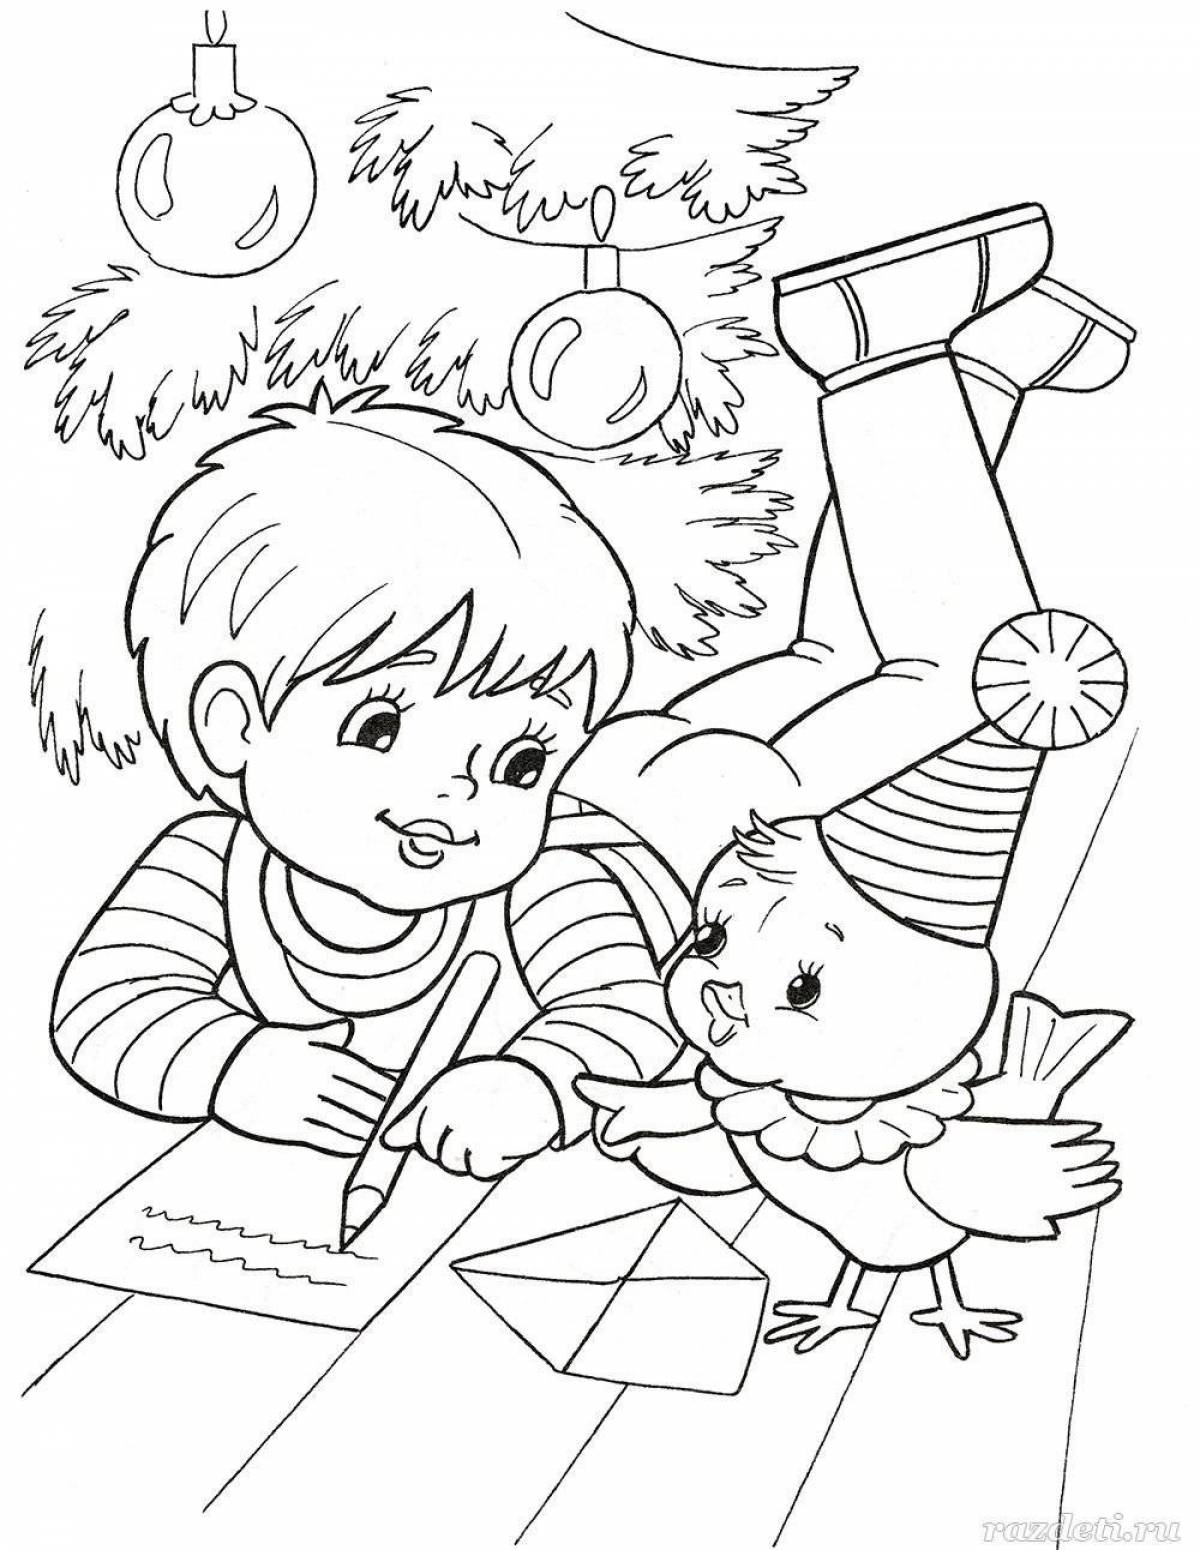 Great Christmas coloring book for boys